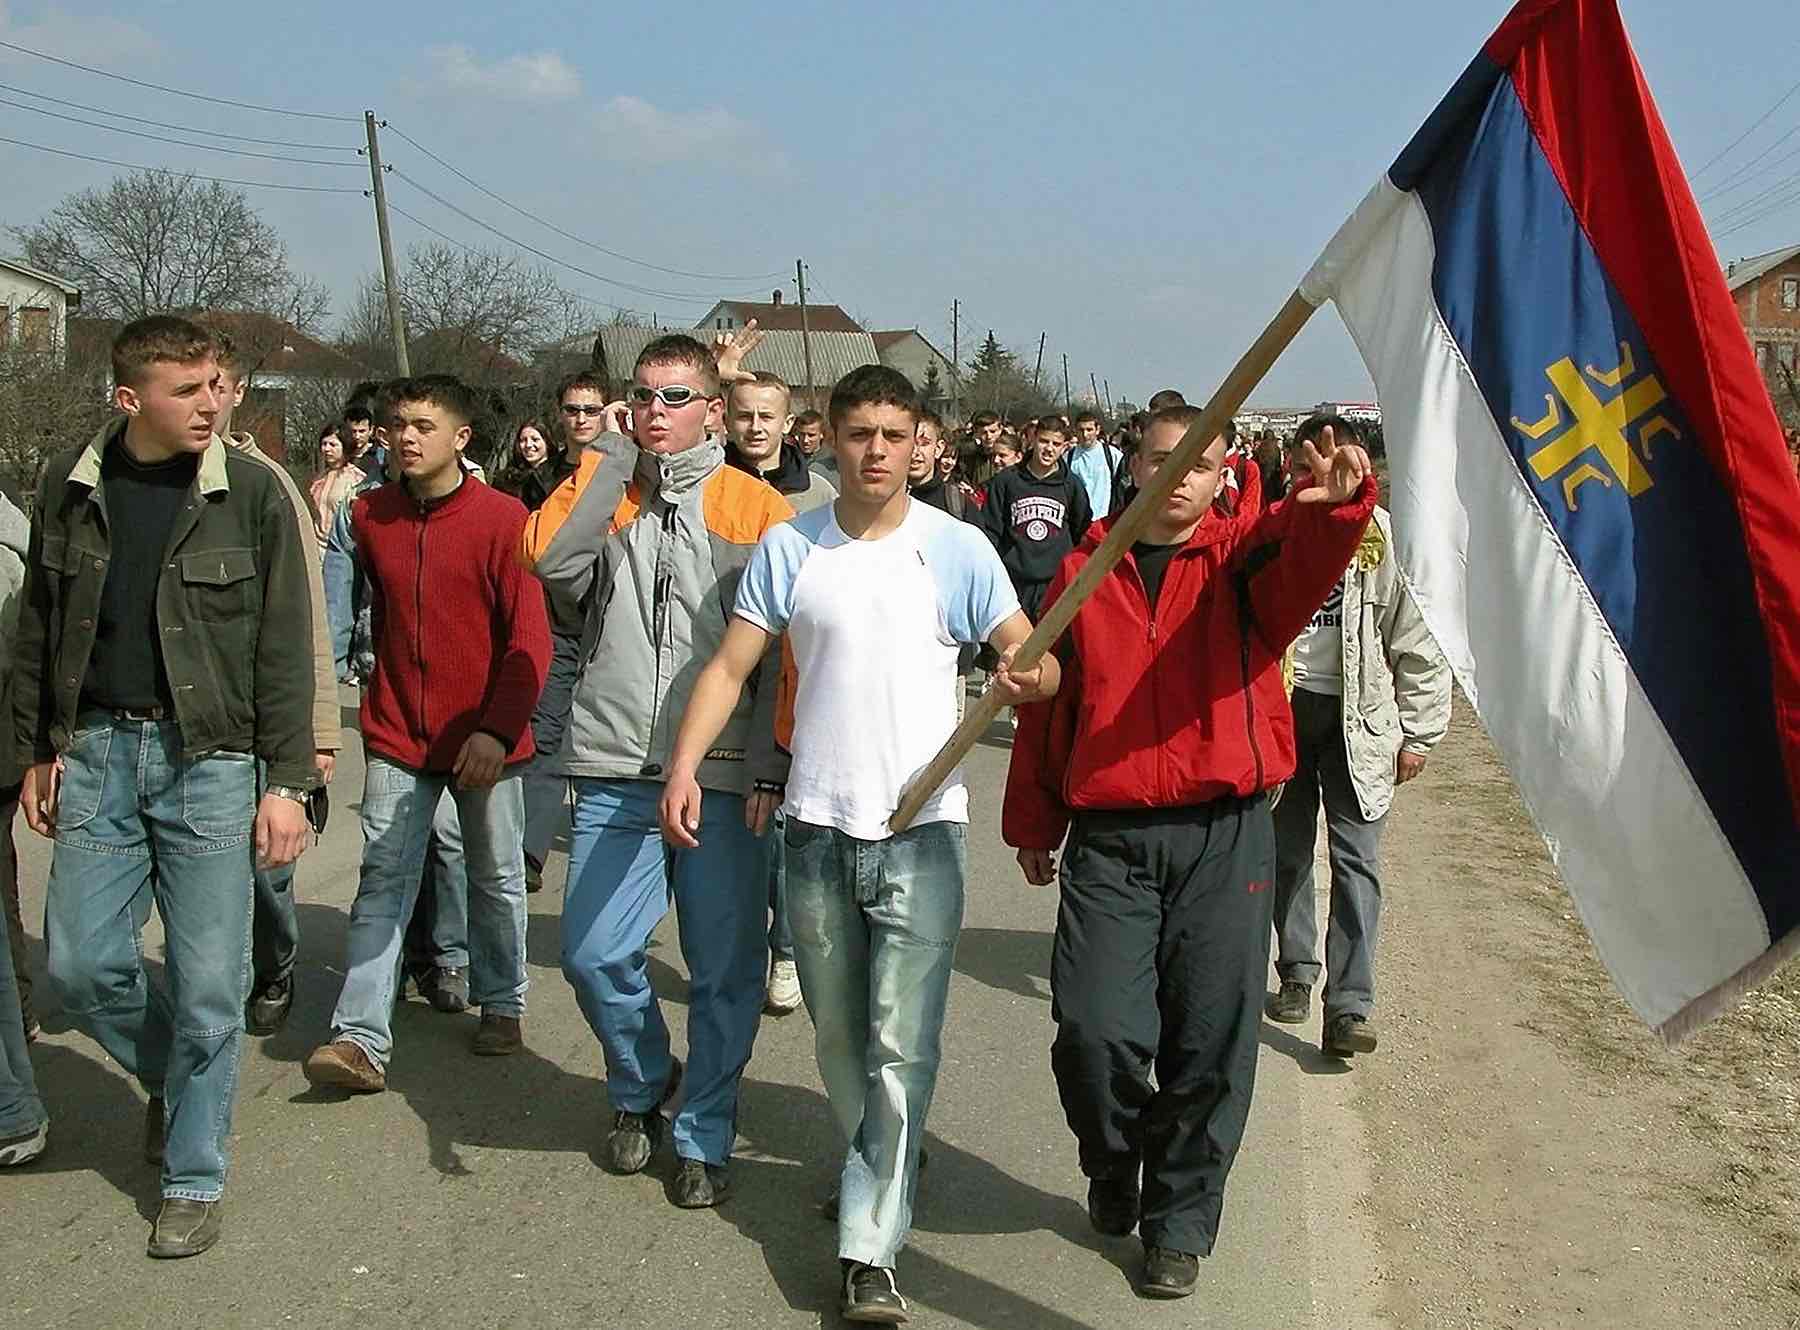 Serbian students of a secondary school in central Kosovo protest on the regional highway Pristina-Skopje